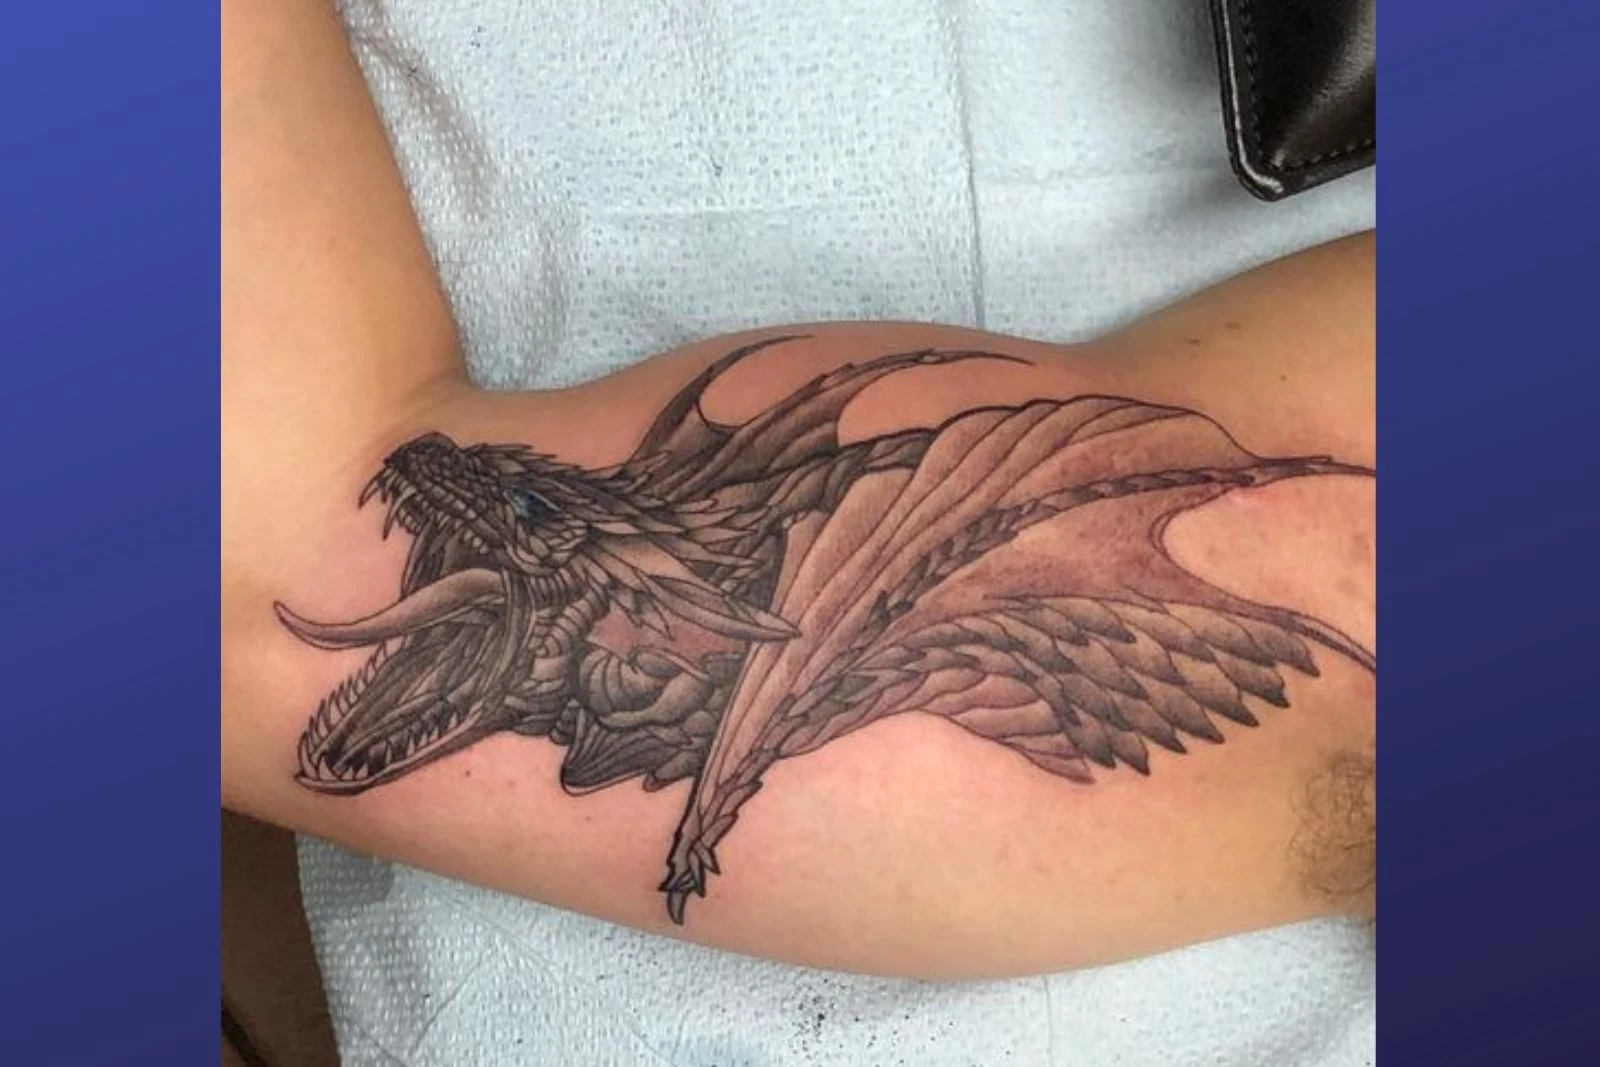 Wyvern tattoo I got while in Okinawa. Done by Floyed at Black Ocean tattoo.  : r/tattoos